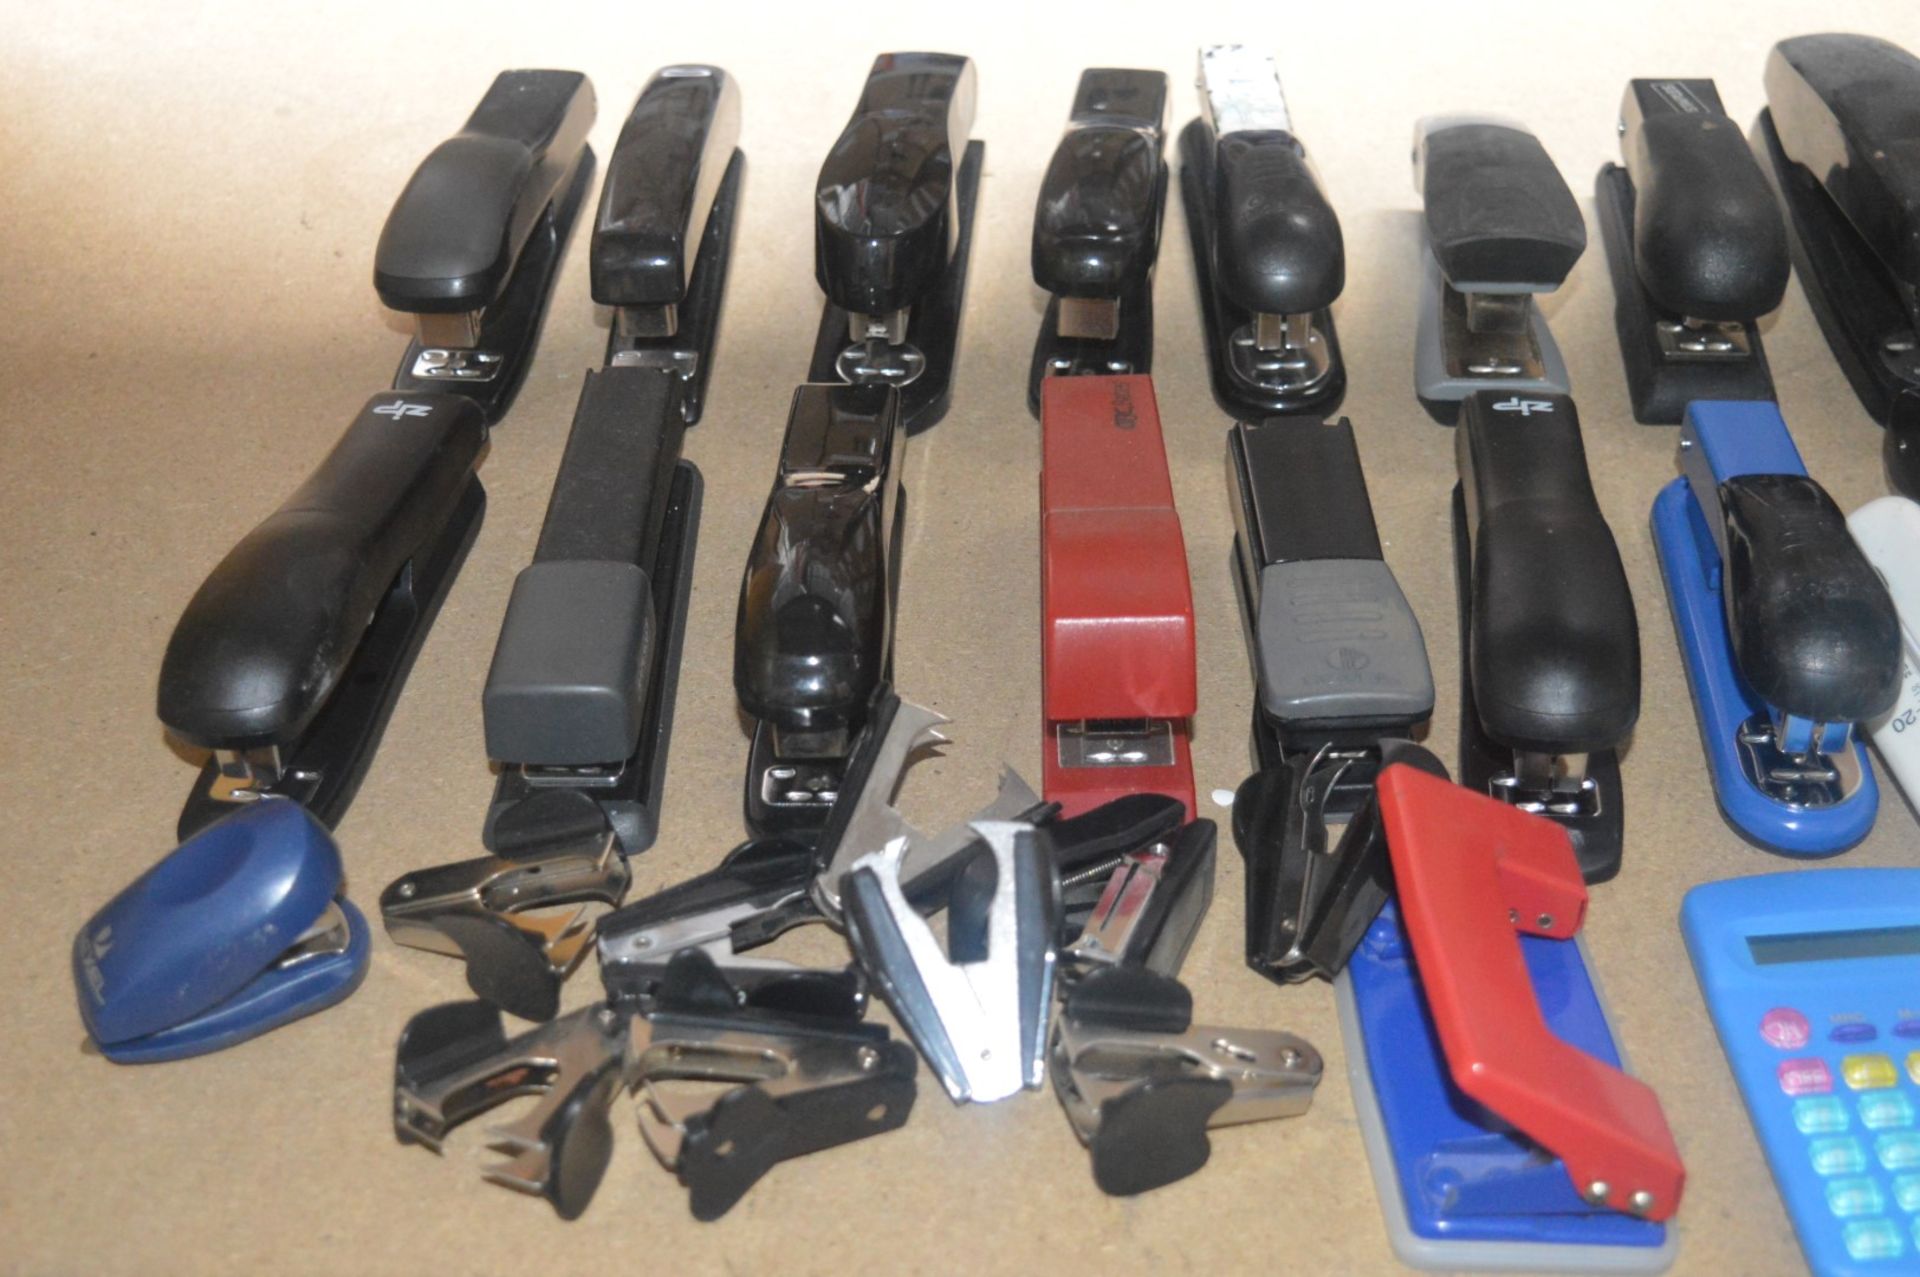 Approx 40 x Various Pieces of Office Stationary - Includes Staplers, Calculators, Hole Punches and - Image 2 of 5